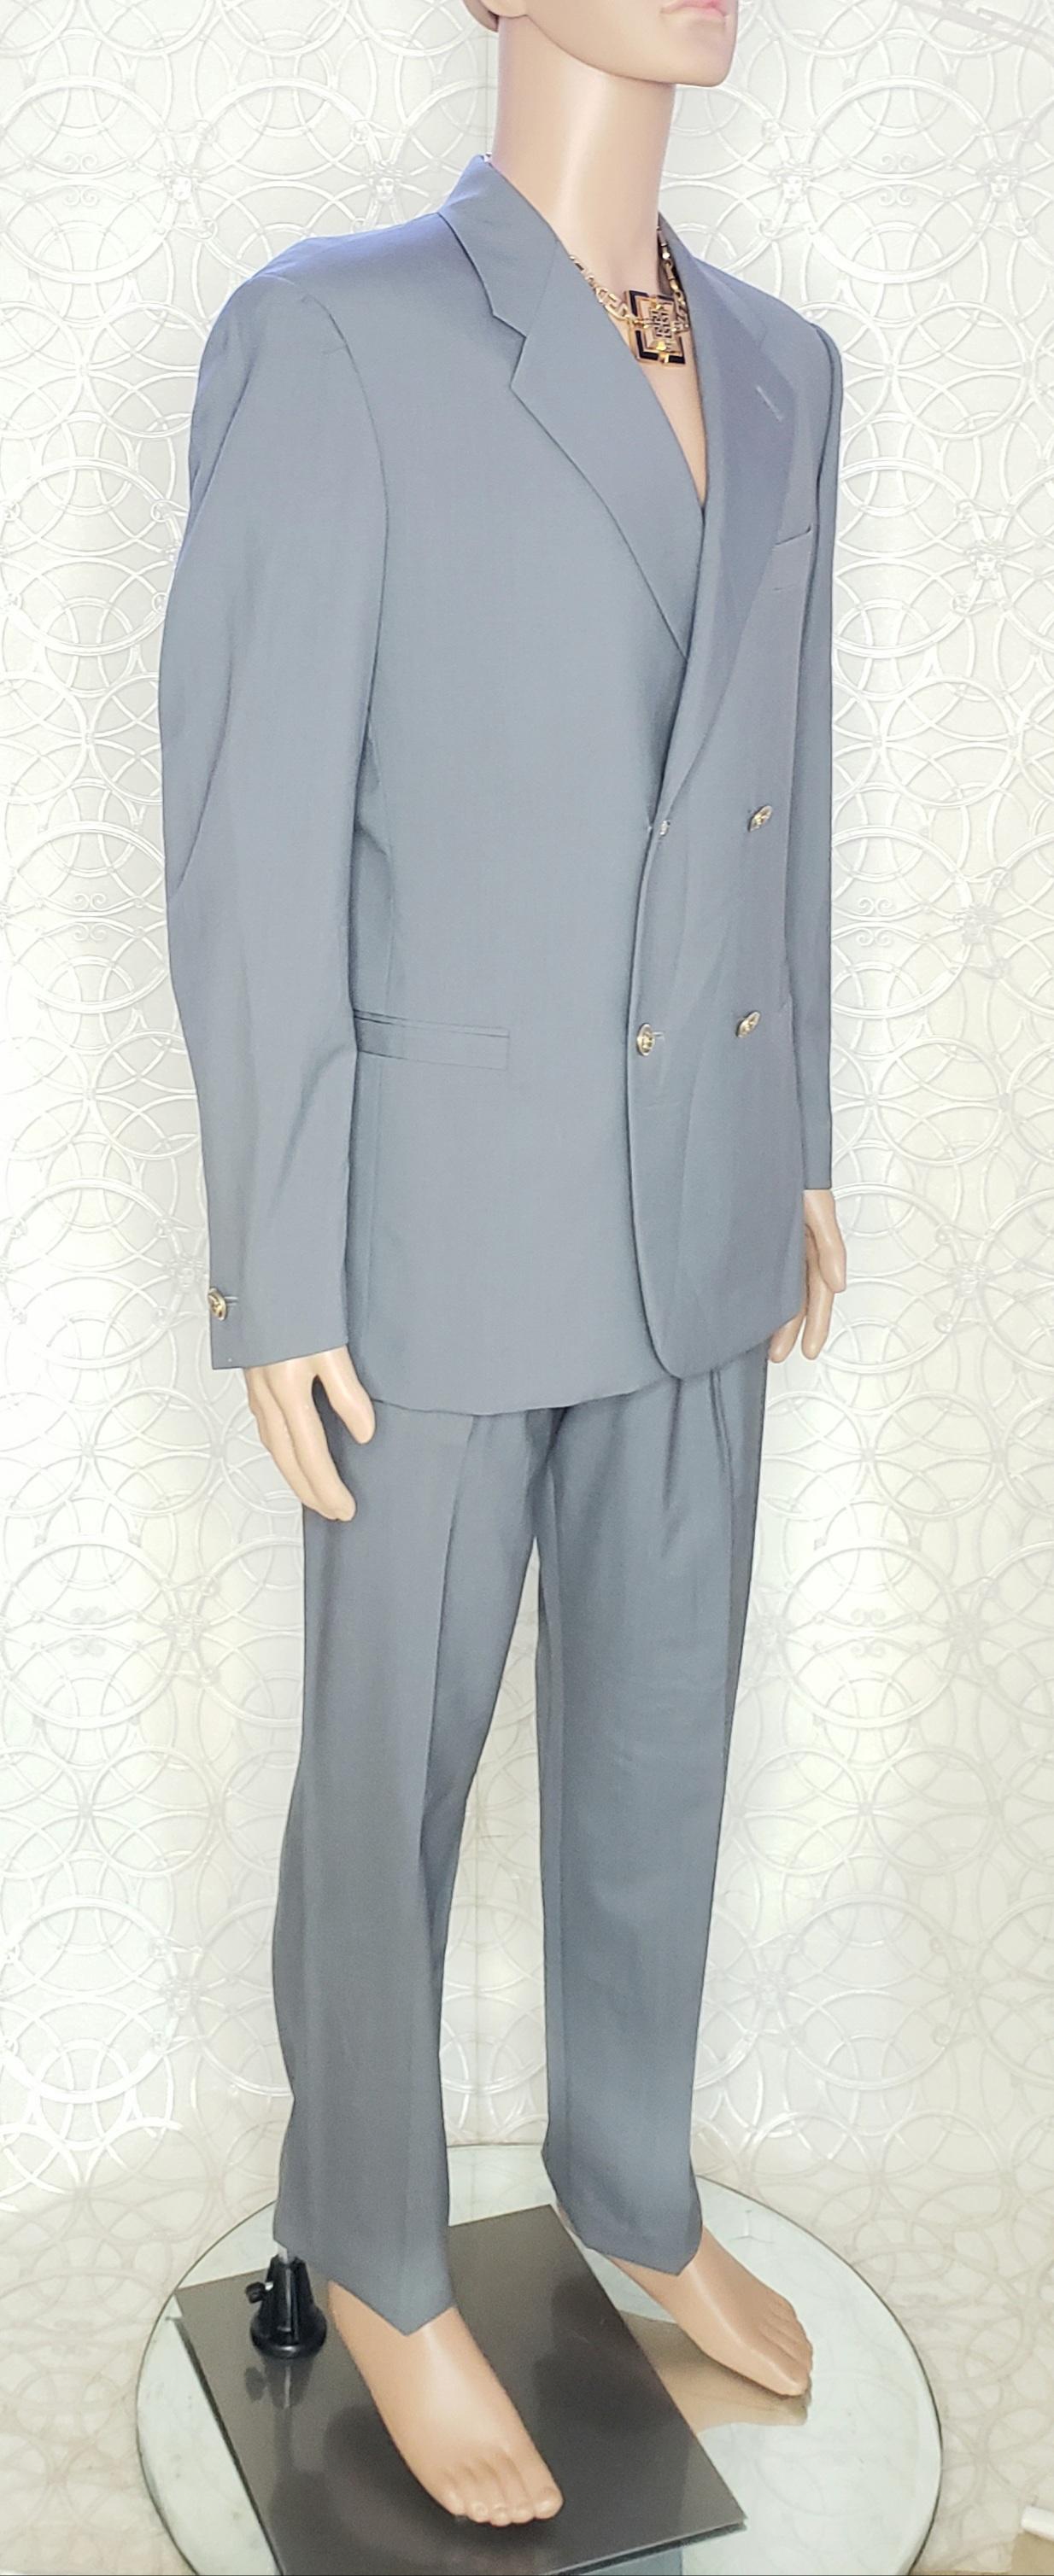 VERSACE S/S 2012 look # 30 BRAND NEW GRAY SUIT 48 - 38 (M) For Sale 3